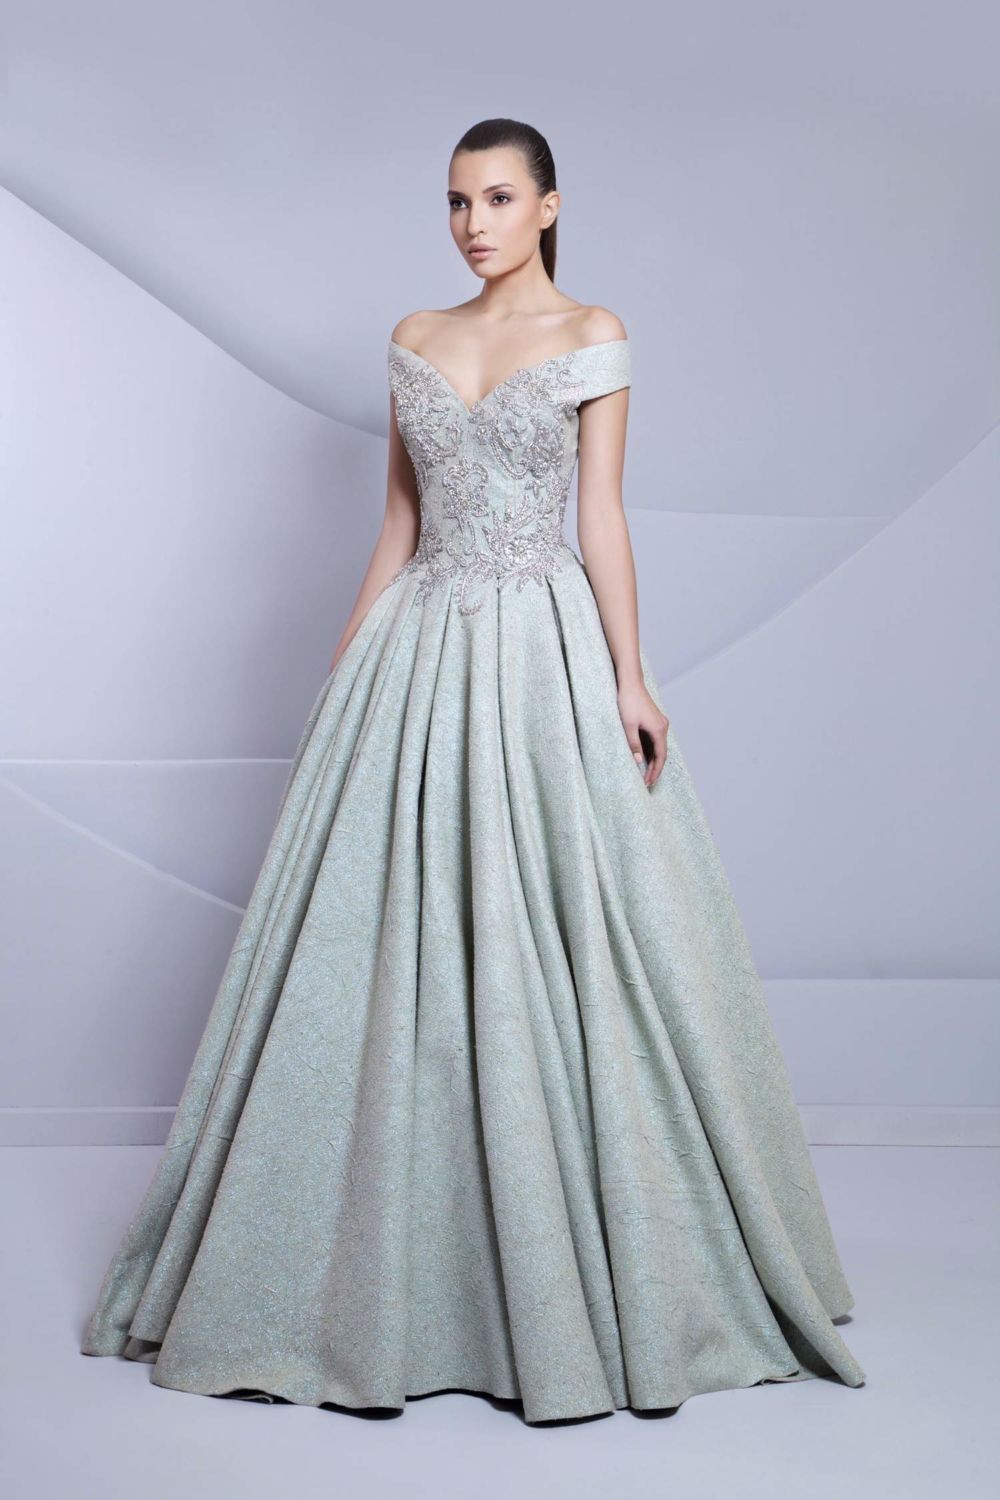 10 Couture Tarek Sinno Gowns You'll Dream of Wearing ...